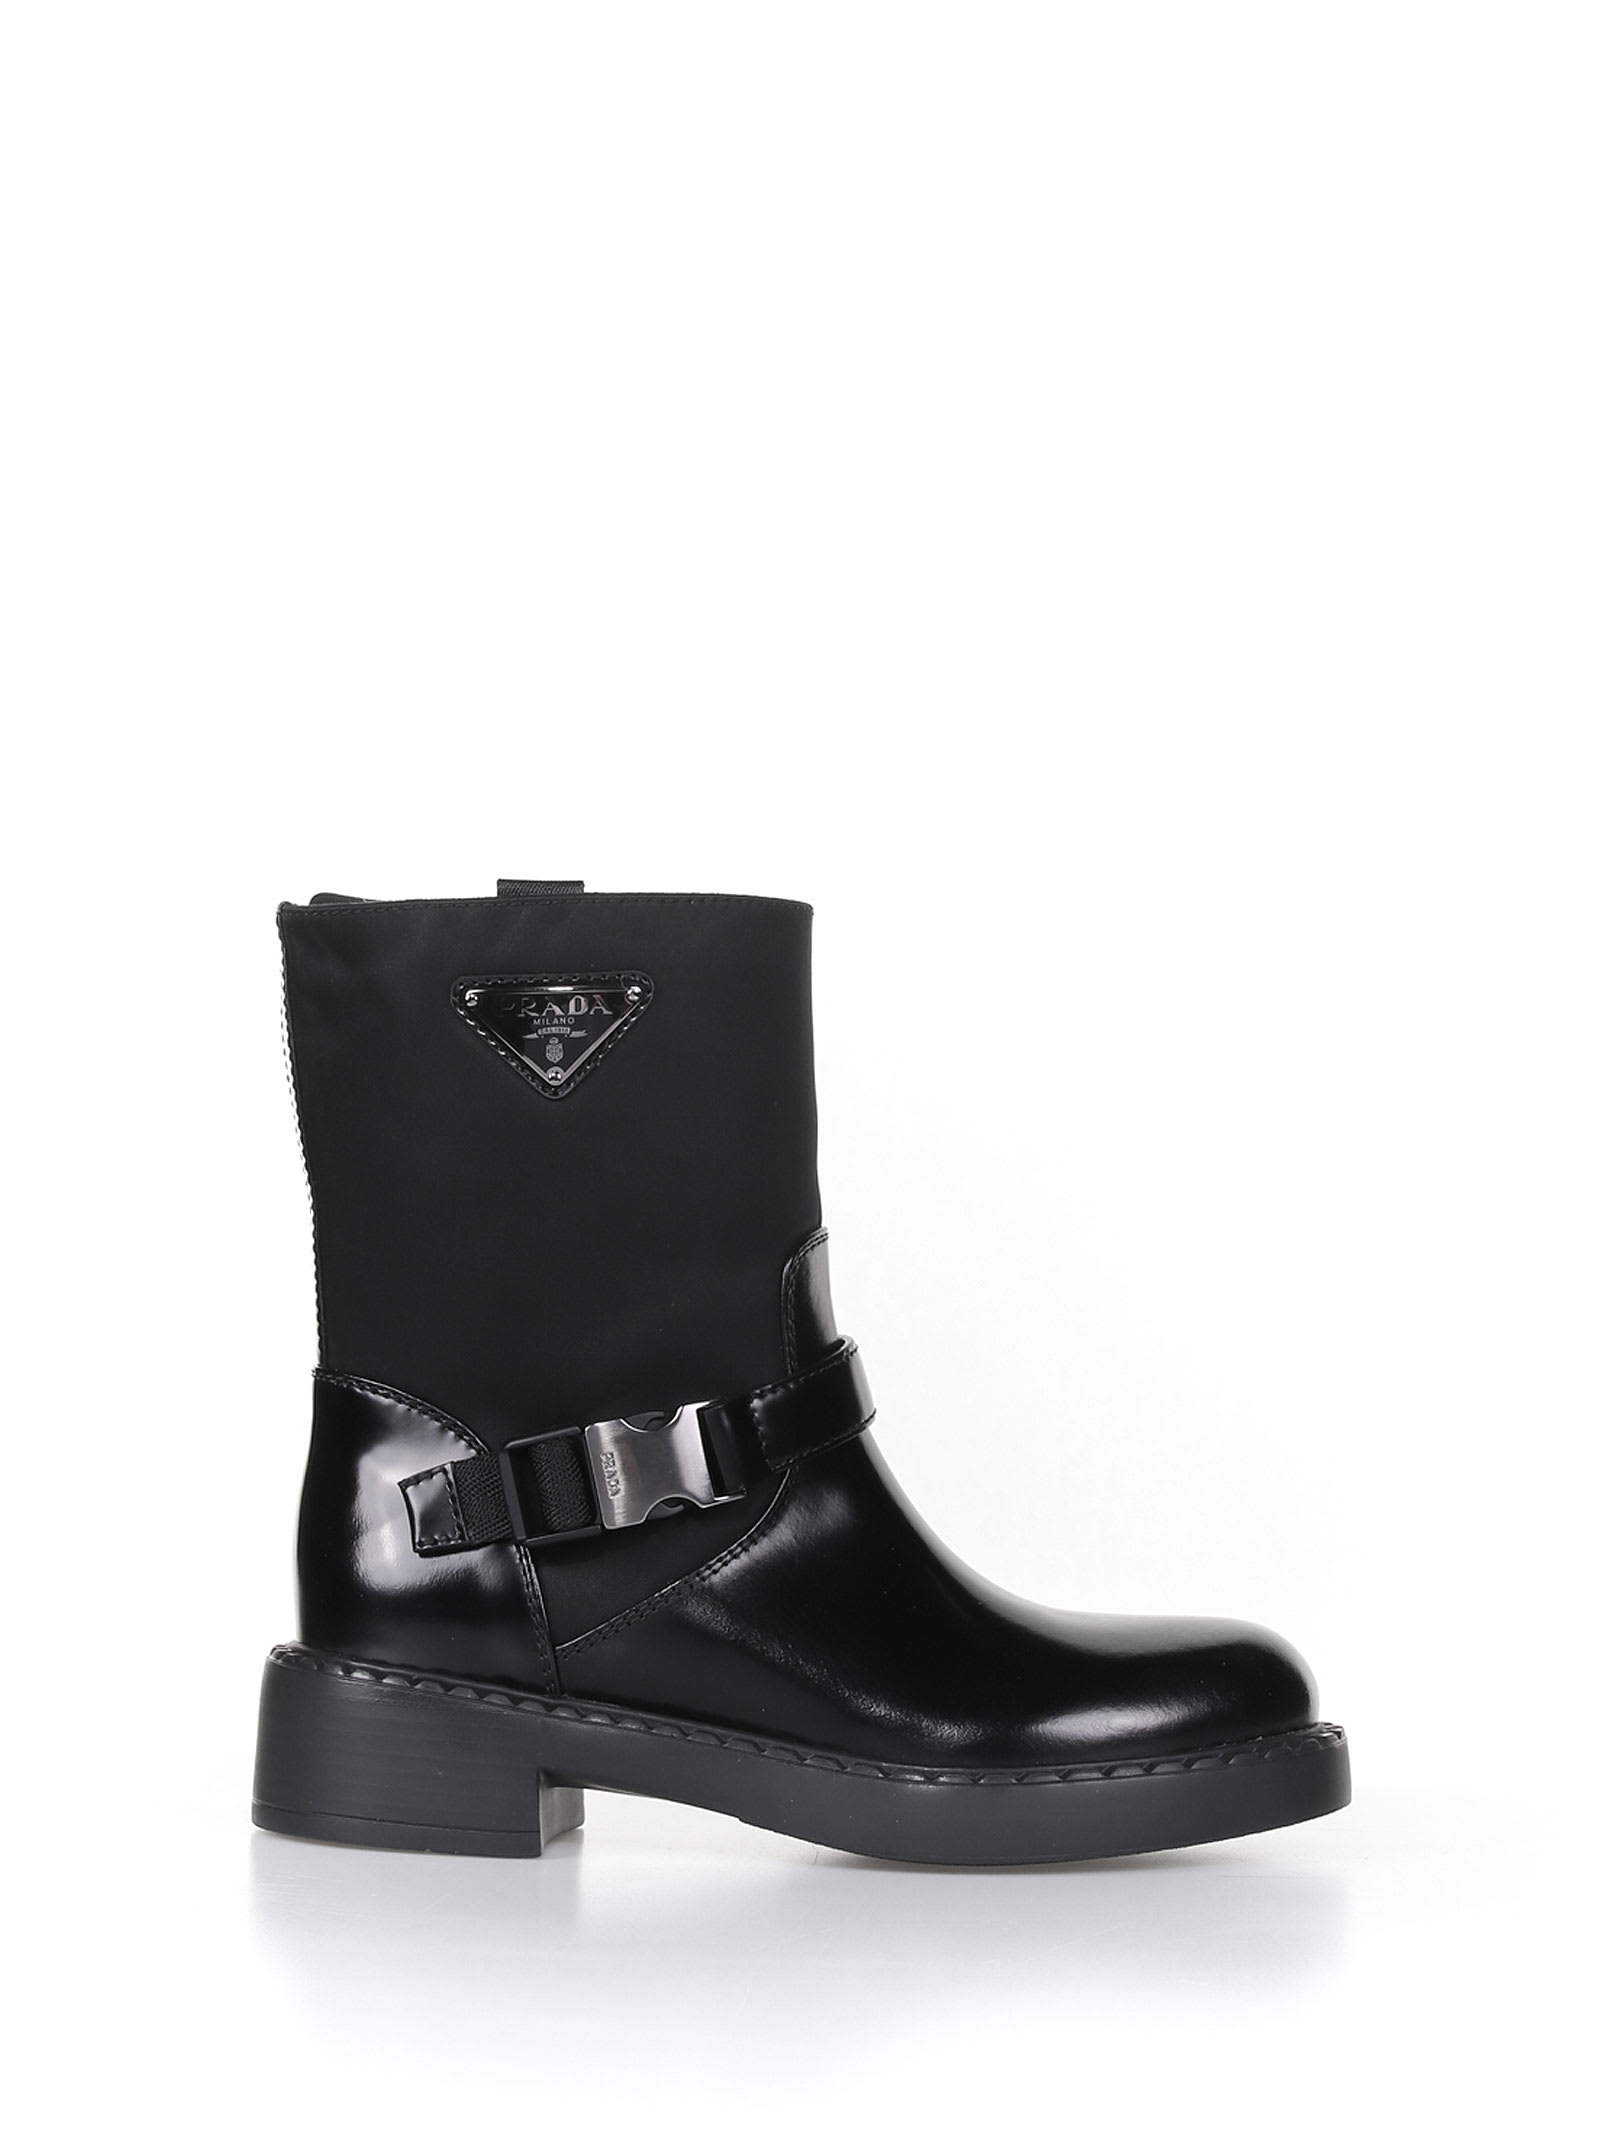 Buy Prada Black Boots online, shop Prada shoes with free shipping